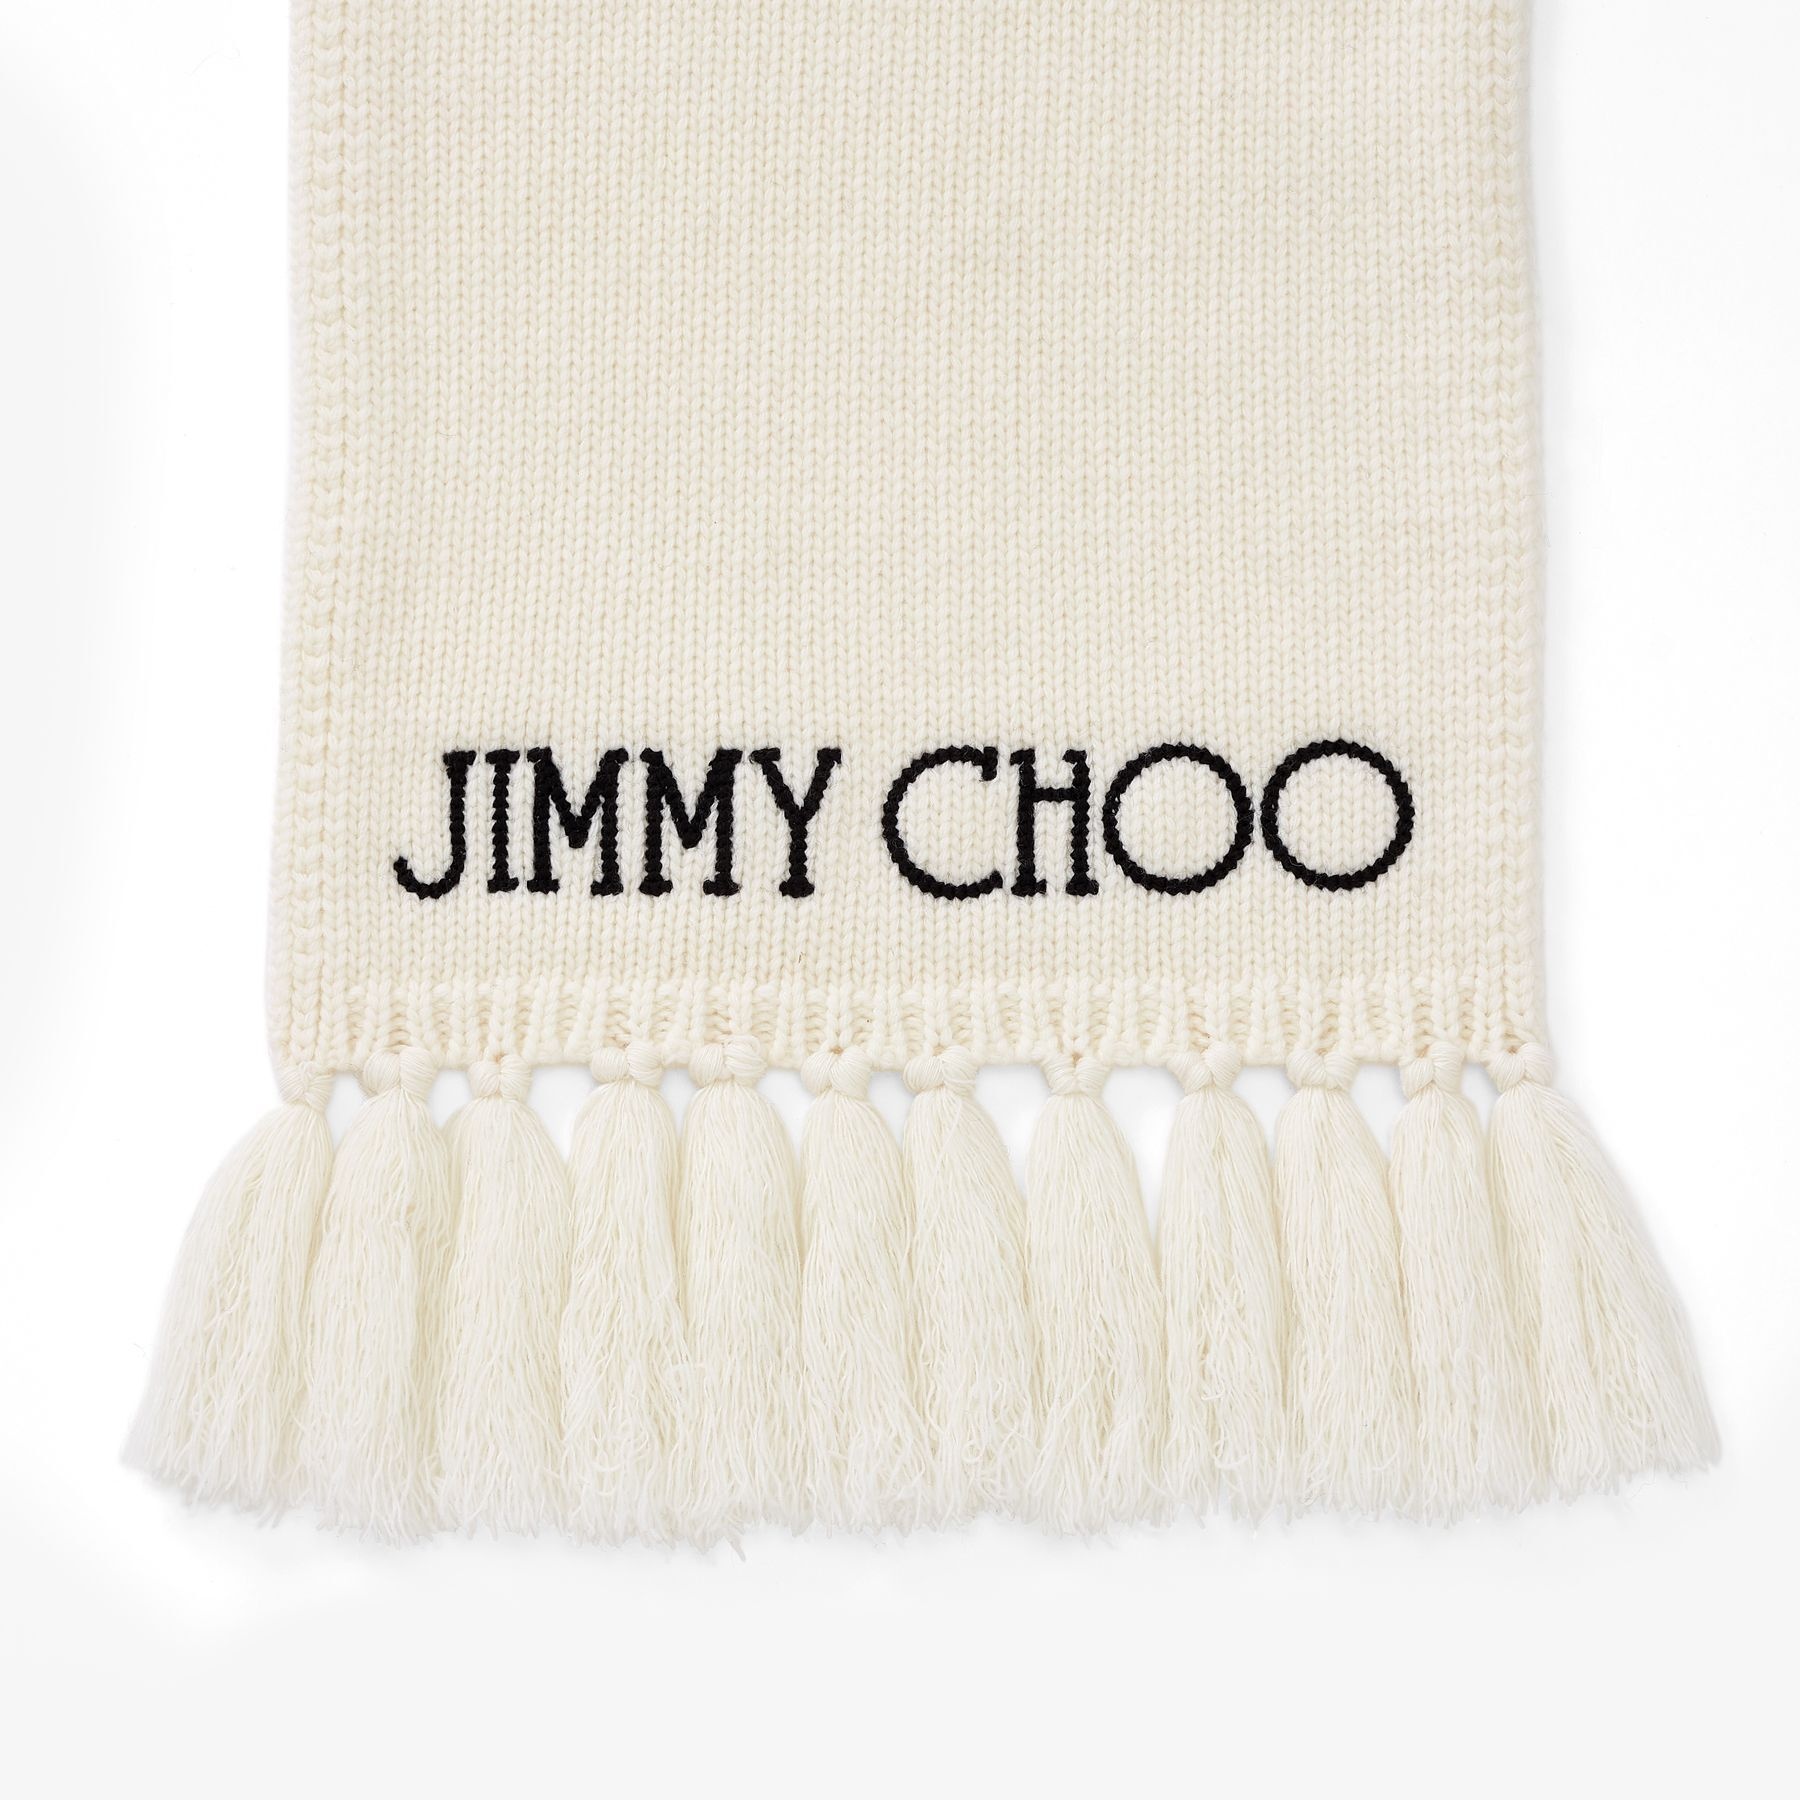 Jutta
Latte Wool Scarf with Embroidered Jimmy Choo Logo - 3